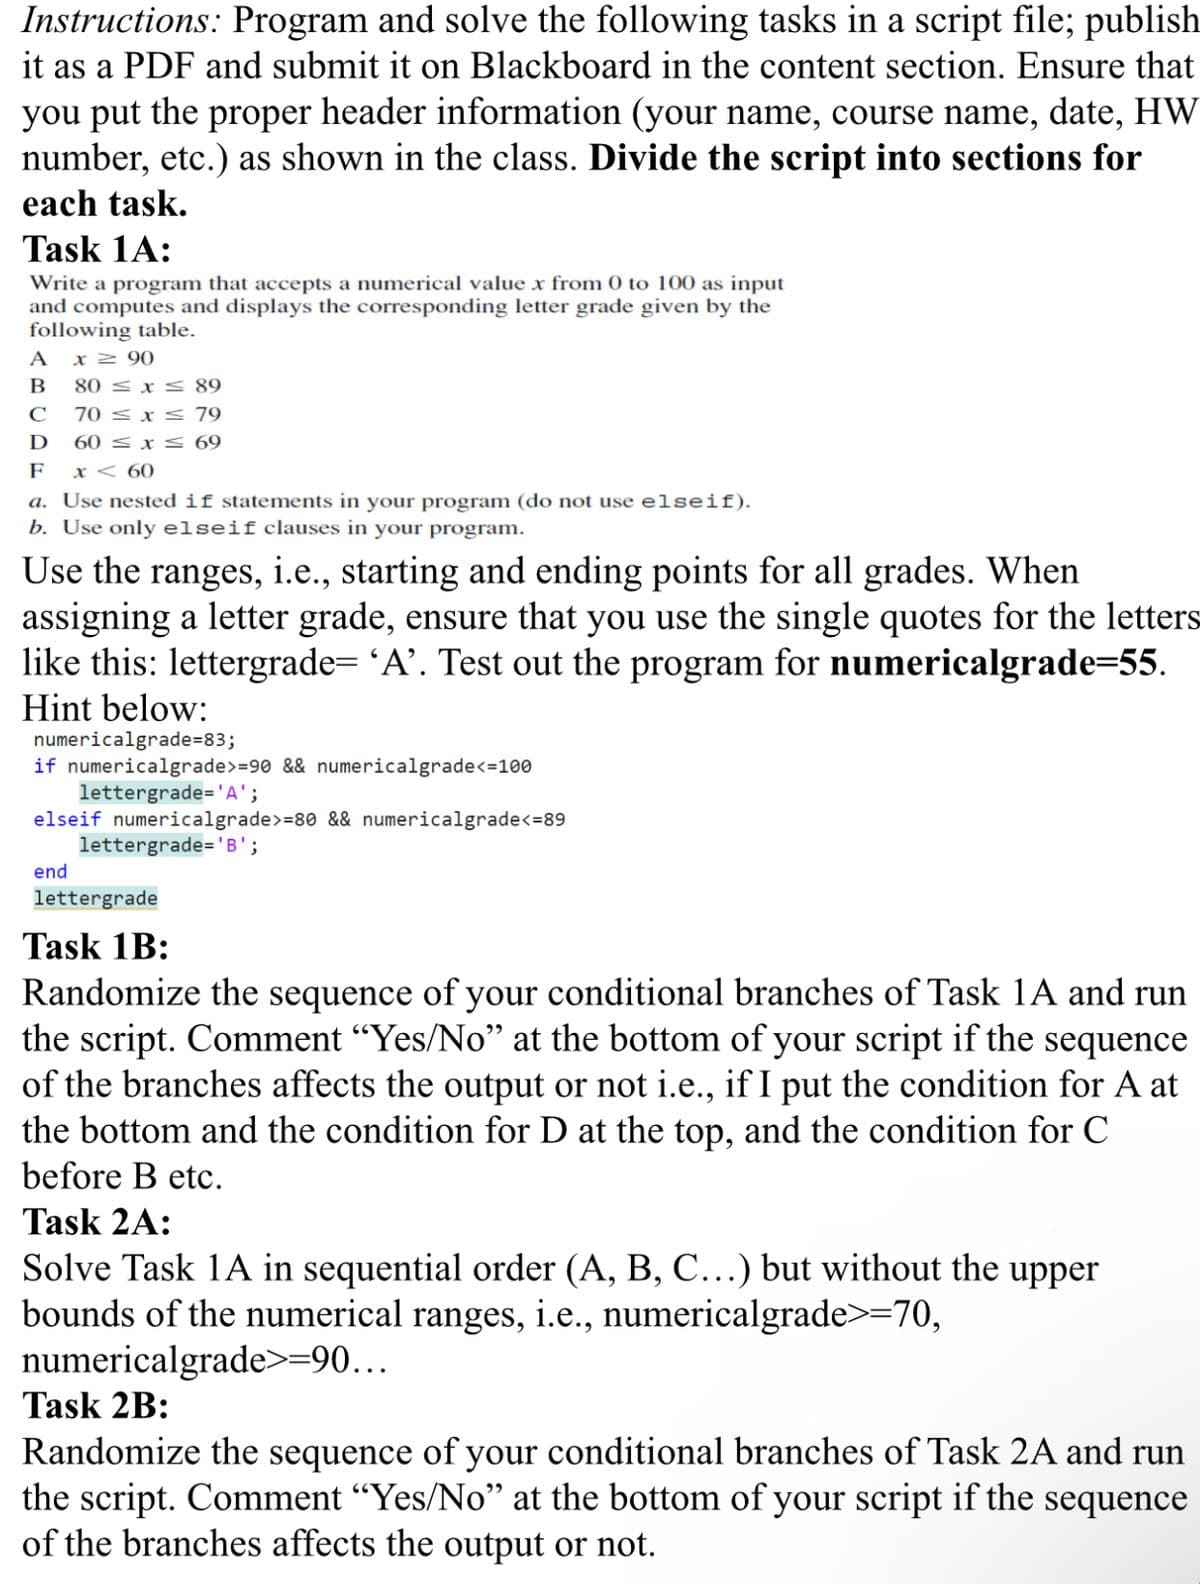 Instructions: Program and solve the following tasks in a script file; publish
it as a PDF and submit it on Blackboard in the content section. Ensure that
you put the proper header information (your name, course name, date, HW
number, etc.) as shown in the class. Divide the script into sections for
each task.
Task 1A:
Write a program that accepts a numerical value x from 0 to 100 as input
and computes and displays the corresponding letter grade given by the
following table.
A x ≥90
B
80 x 89
C
70x79
D
60 ≤ x ≤ 69
F
x < 60
a. Use nested if statements in your program (do not use elseif).
b. Use only elseif clauses in your program.
Use the ranges, i.e., starting and ending points for all grades. When
assigning a letter grade, ensure that you use the single quotes for the letters
like this: lettergrade= 'A'. Test out the program for numericalgrade=55.
Hint below:
numericalgrade=83;
if numericalgrade>=90 && numericalgrade<=100
lettergrade='A';
elseif numericalgrade>=80 && numericalgrade<=89
lettergrade='B';
end
lettergrade
Task 1B:
Randomize the sequence of your conditional branches of Task 1A and run
the script. Comment "Yes/No” at the bottom of your script if the sequence
of the branches affects the output or not i.e., if I put the condition for A at
the bottom and the condition for D at the top, and the condition for C
before B etc.
Task 2A:
Solve Task 1A in sequential order (A, B, C...) but without the upper
bounds of the numerical ranges, i.e., numericalgrade>=70,
numericalgrade>=90...
Task 2B:
Randomize the sequence of your conditional branches of Task 2A and run
the script. Comment "Yes/No" at the bottom of your script if the sequence
of the branches affects the output or not.